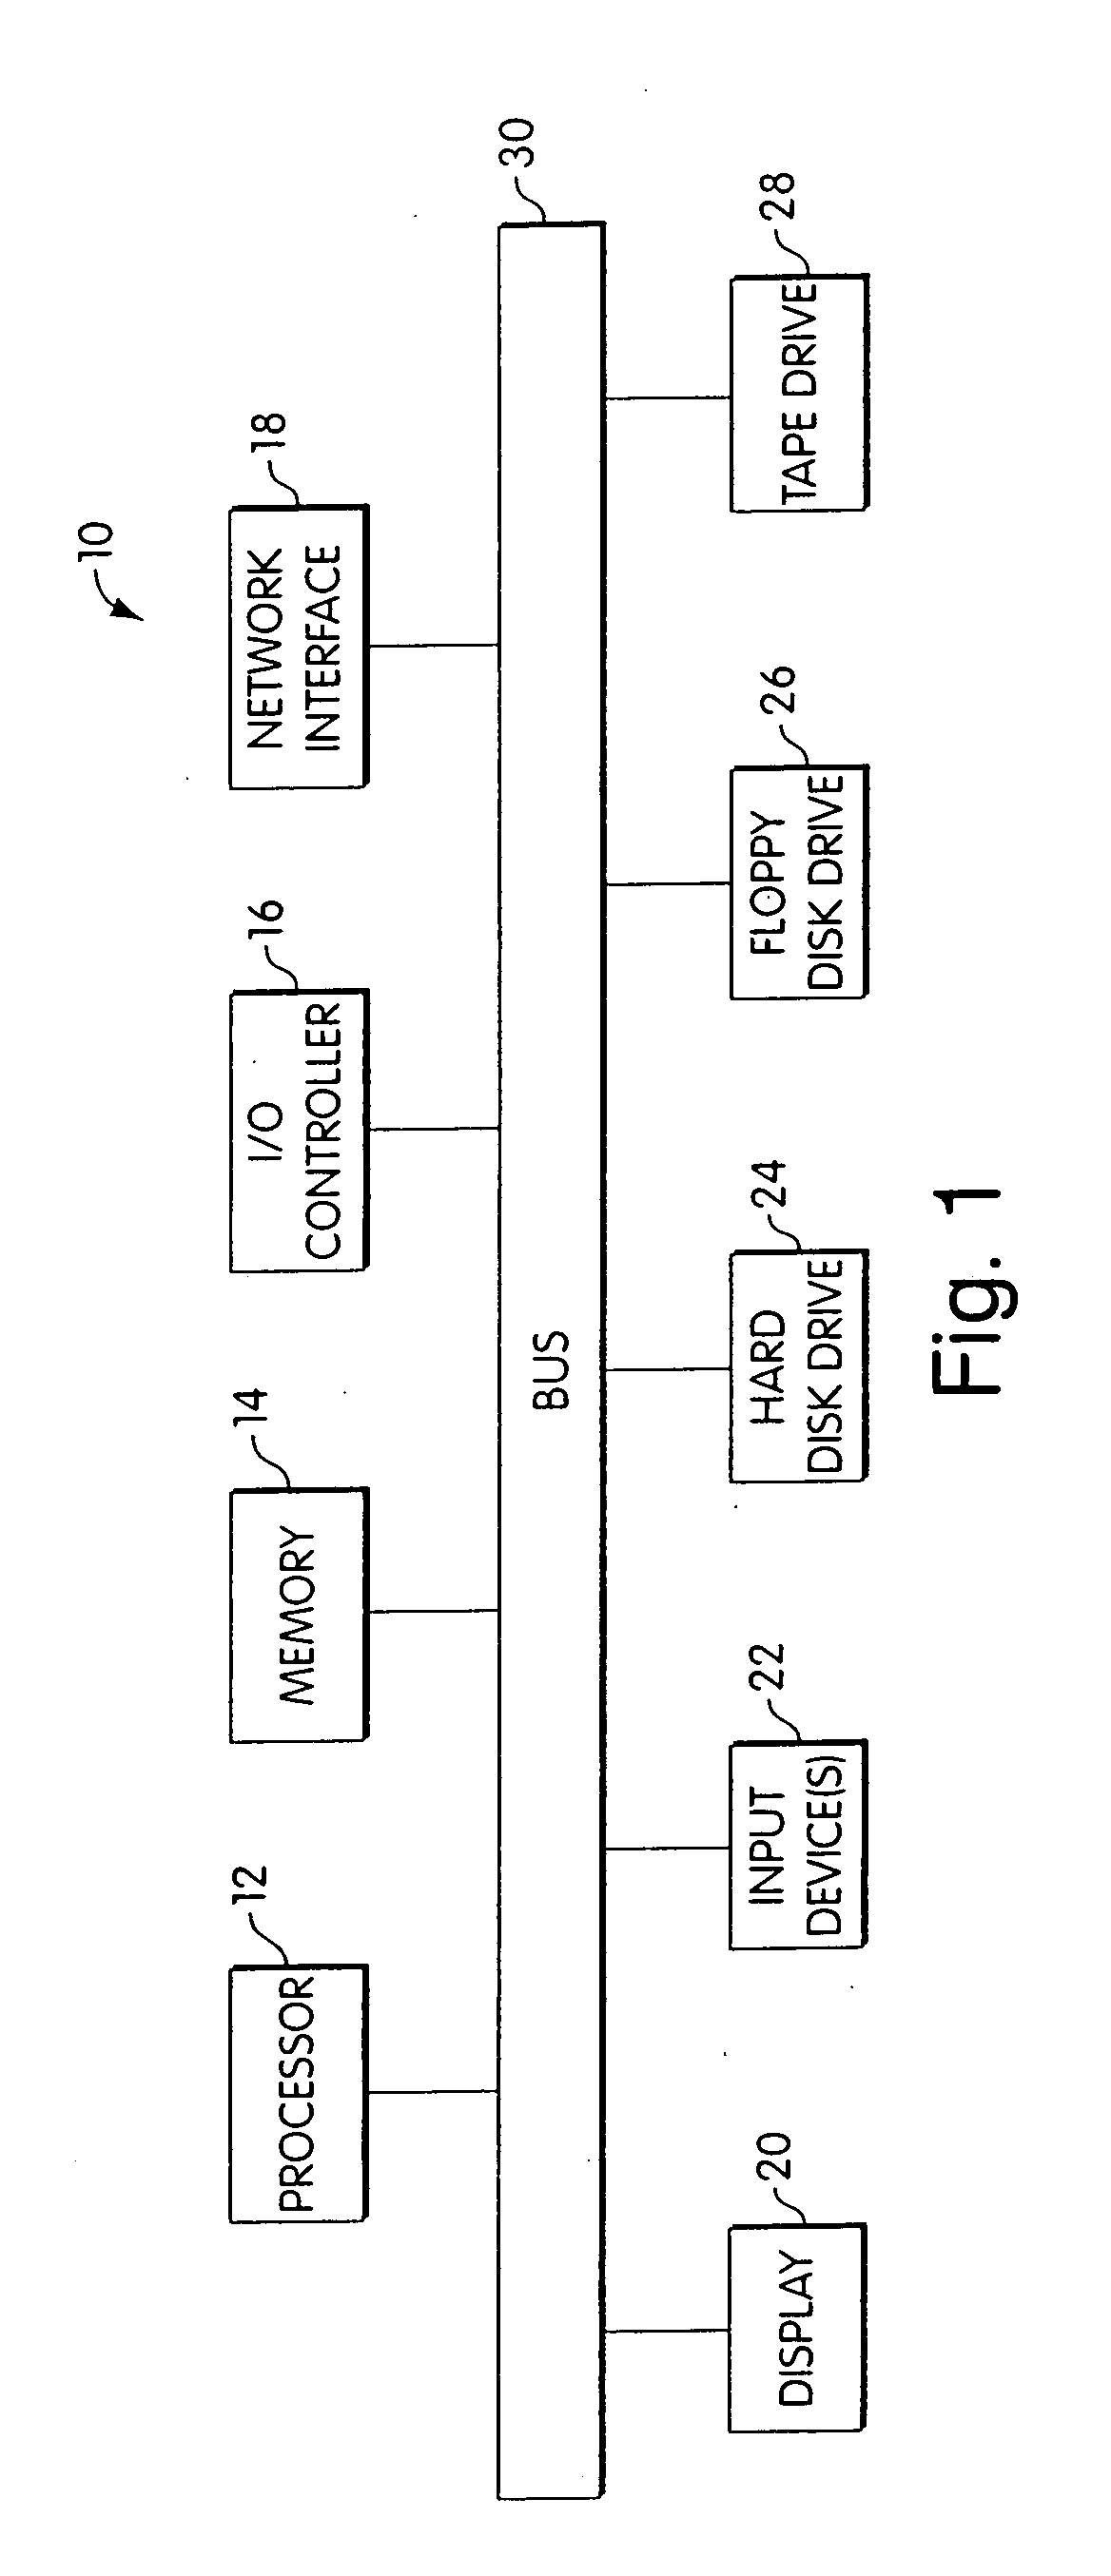 Systems and methods for distributing and viewing electronic documents